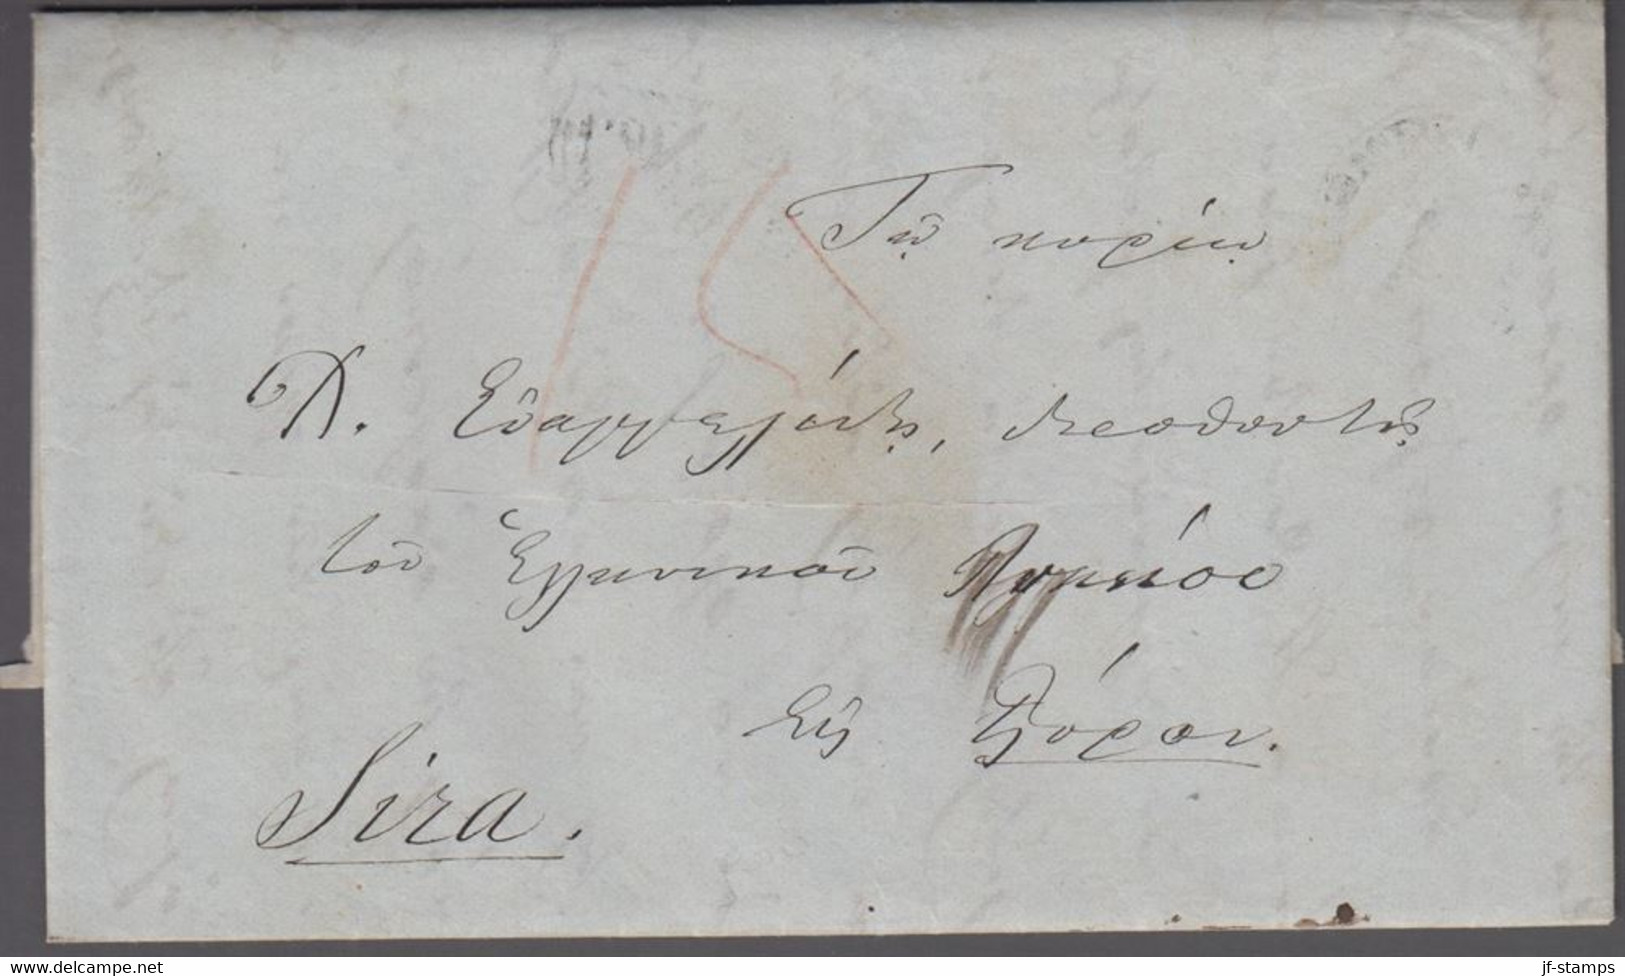 1851. GREECE Prefil Cover Dated 1851. Cancelled. Marking In Brownred.  () - JF412402 - ...-1861 Prephilately